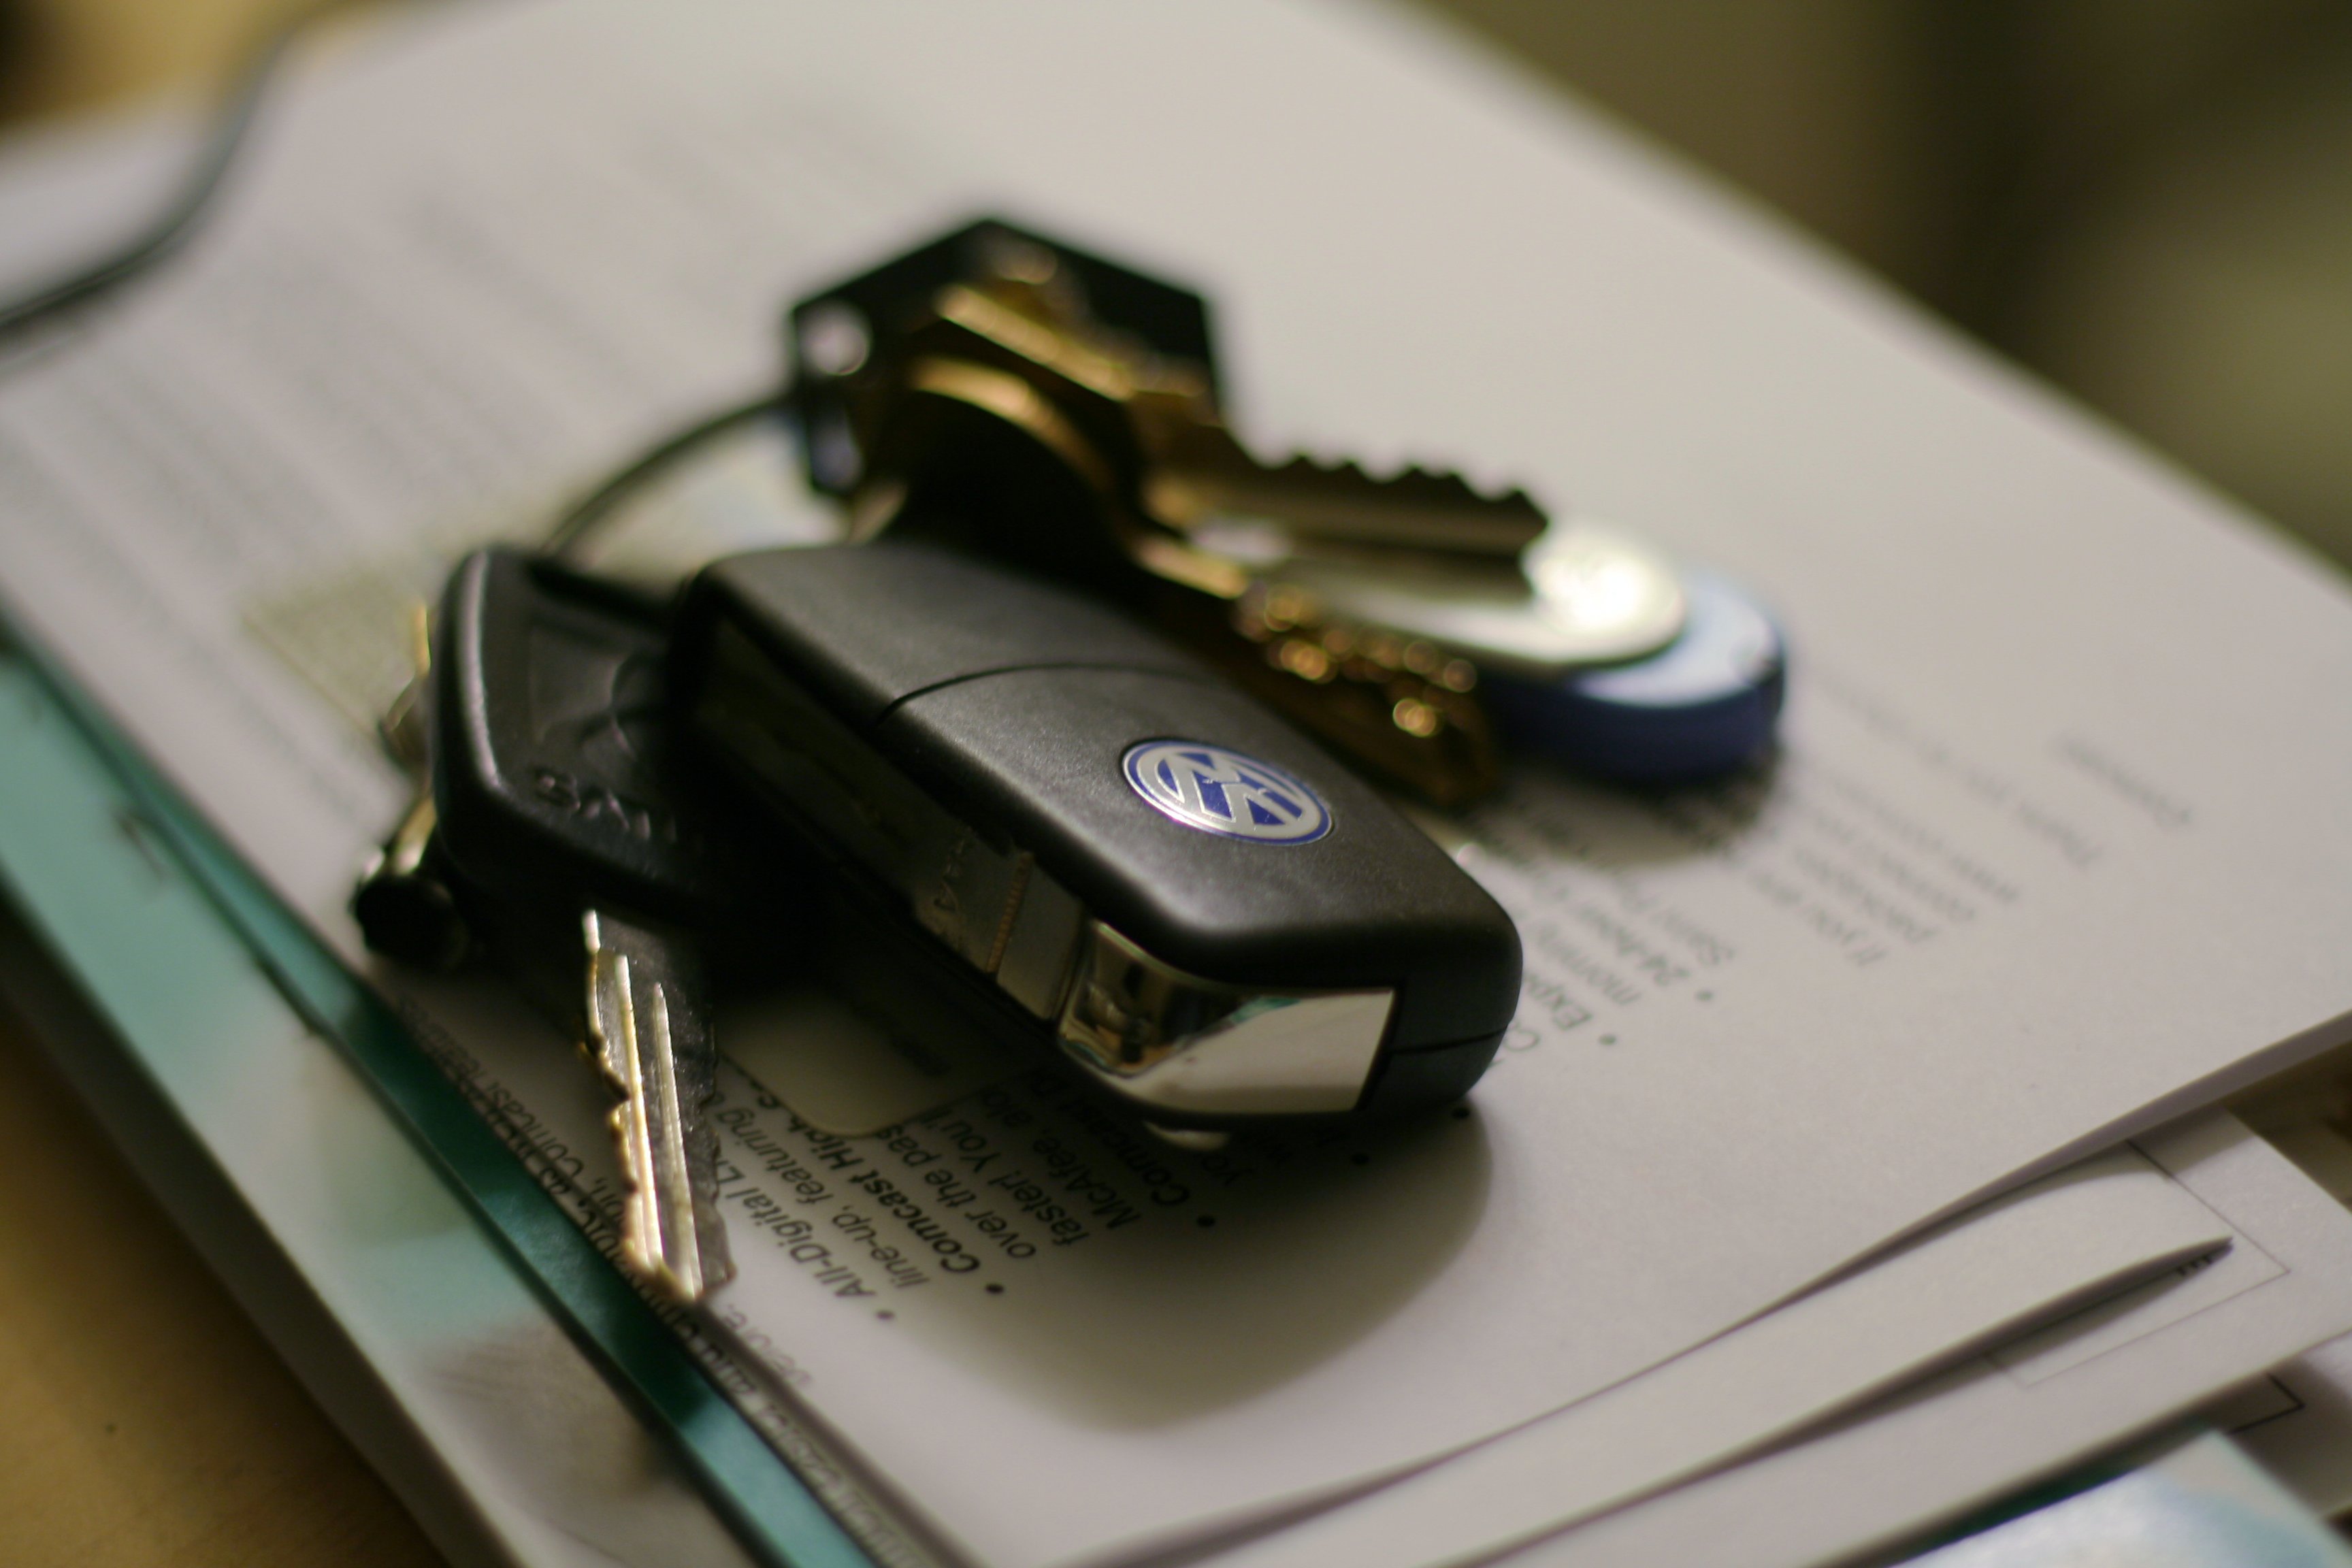 Volkswagen key on a table and paper